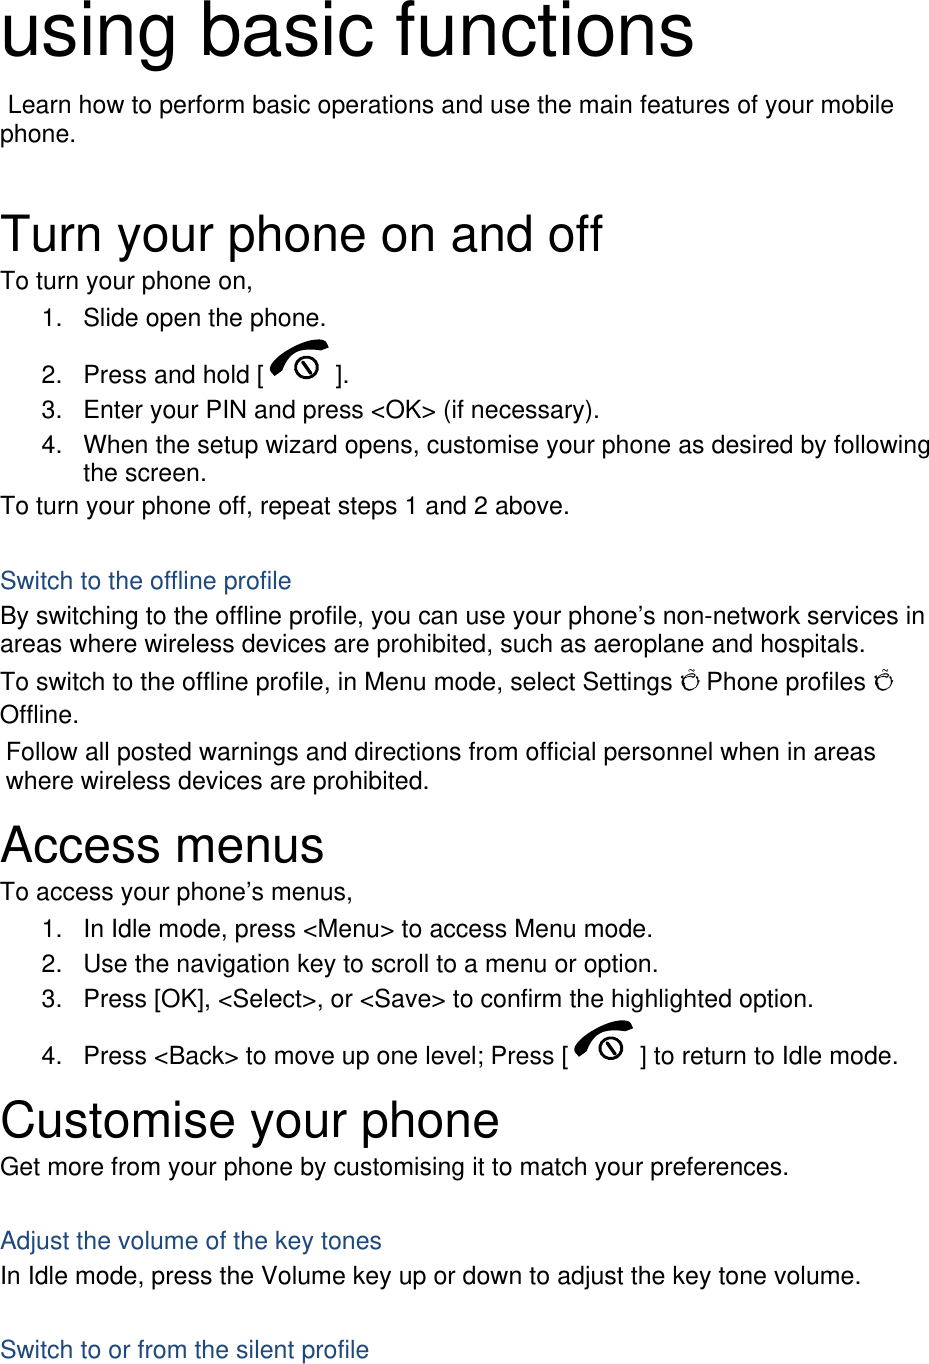  using basic functions  Learn how to perform basic operations and use the main features of your mobile phone.   Turn your phone on and off To turn your phone on, 1.  Slide open the phone. 2.  Press and hold [ ]. 3.  Enter your PIN and press &lt;OK&gt; (if necessary). 4.  When the setup wizard opens, customise your phone as desired by following the screen. To turn your phone off, repeat steps 1 and 2 above.  Switch to the offline profile By switching to the offline profile, you can use your phone’s non-network services in areas where wireless devices are prohibited, such as aeroplane and hospitals. To switch to the offline profile, in Menu mode, select Settings Õ Phone profiles Õ Offline. Follow all posted warnings and directions from official personnel when in areas where wireless devices are prohibited. Access menus To access your phone’s menus, 1.  In Idle mode, press &lt;Menu&gt; to access Menu mode. 2.  Use the navigation key to scroll to a menu or option. 3.  Press [OK], &lt;Select&gt;, or &lt;Save&gt; to confirm the highlighted option. 4.  Press &lt;Back&gt; to move up one level; Press [ ] to return to Idle mode. Customise your phone Get more from your phone by customising it to match your preferences.  Adjust the volume of the key tones In Idle mode, press the Volume key up or down to adjust the key tone volume.  Switch to or from the silent profile 